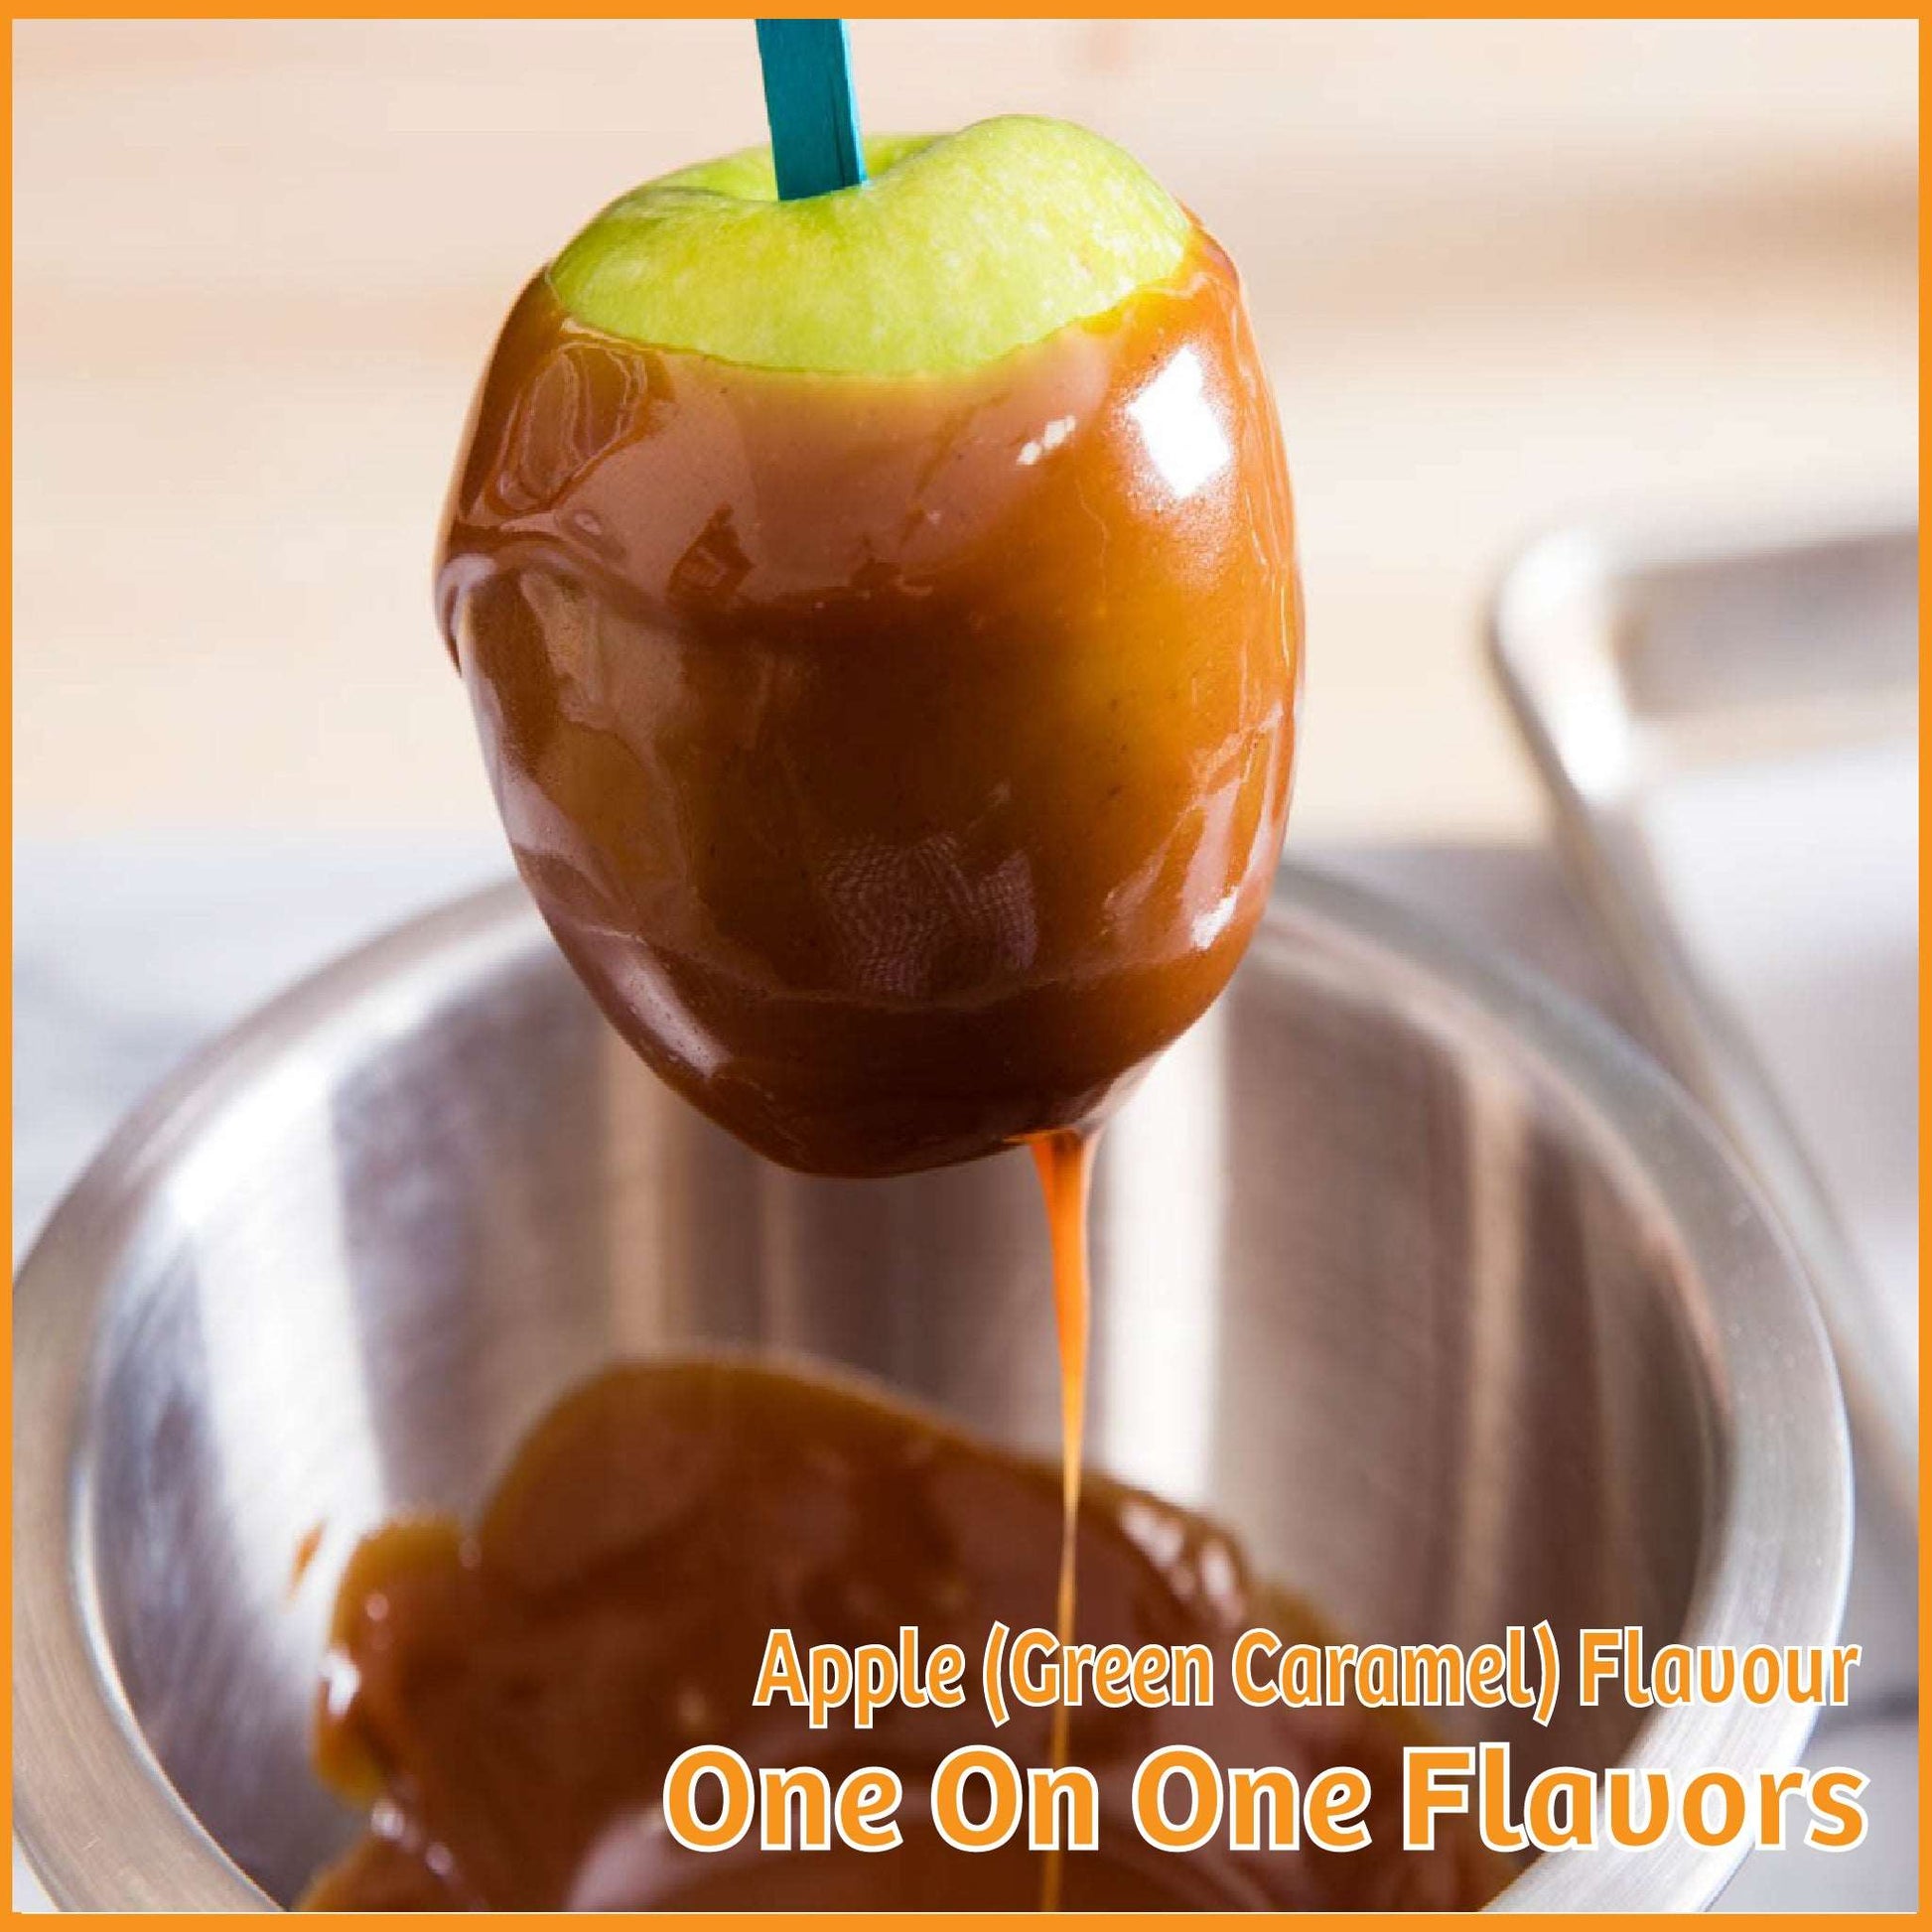 Apple (Green Caramel) Flavour- One On One Flavors - Flavour Fog - Canada's flavour depot.